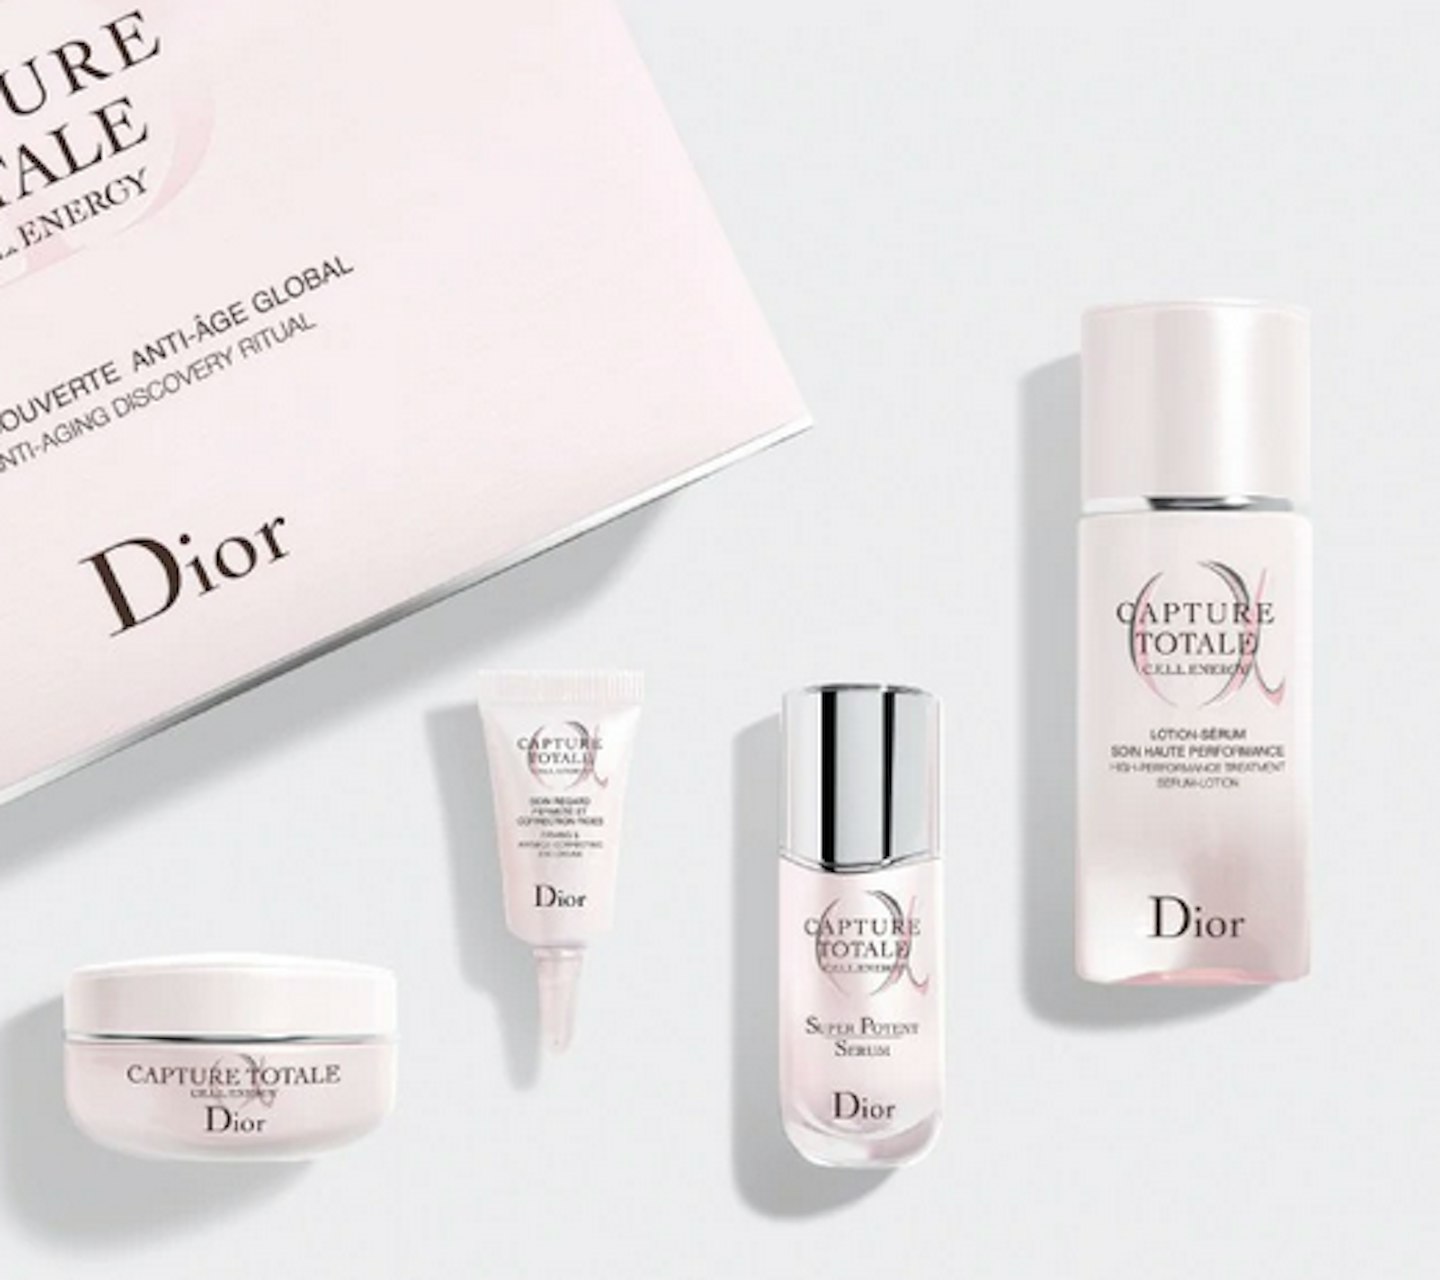 Dior Capture Totale Discovery Set, £91.50